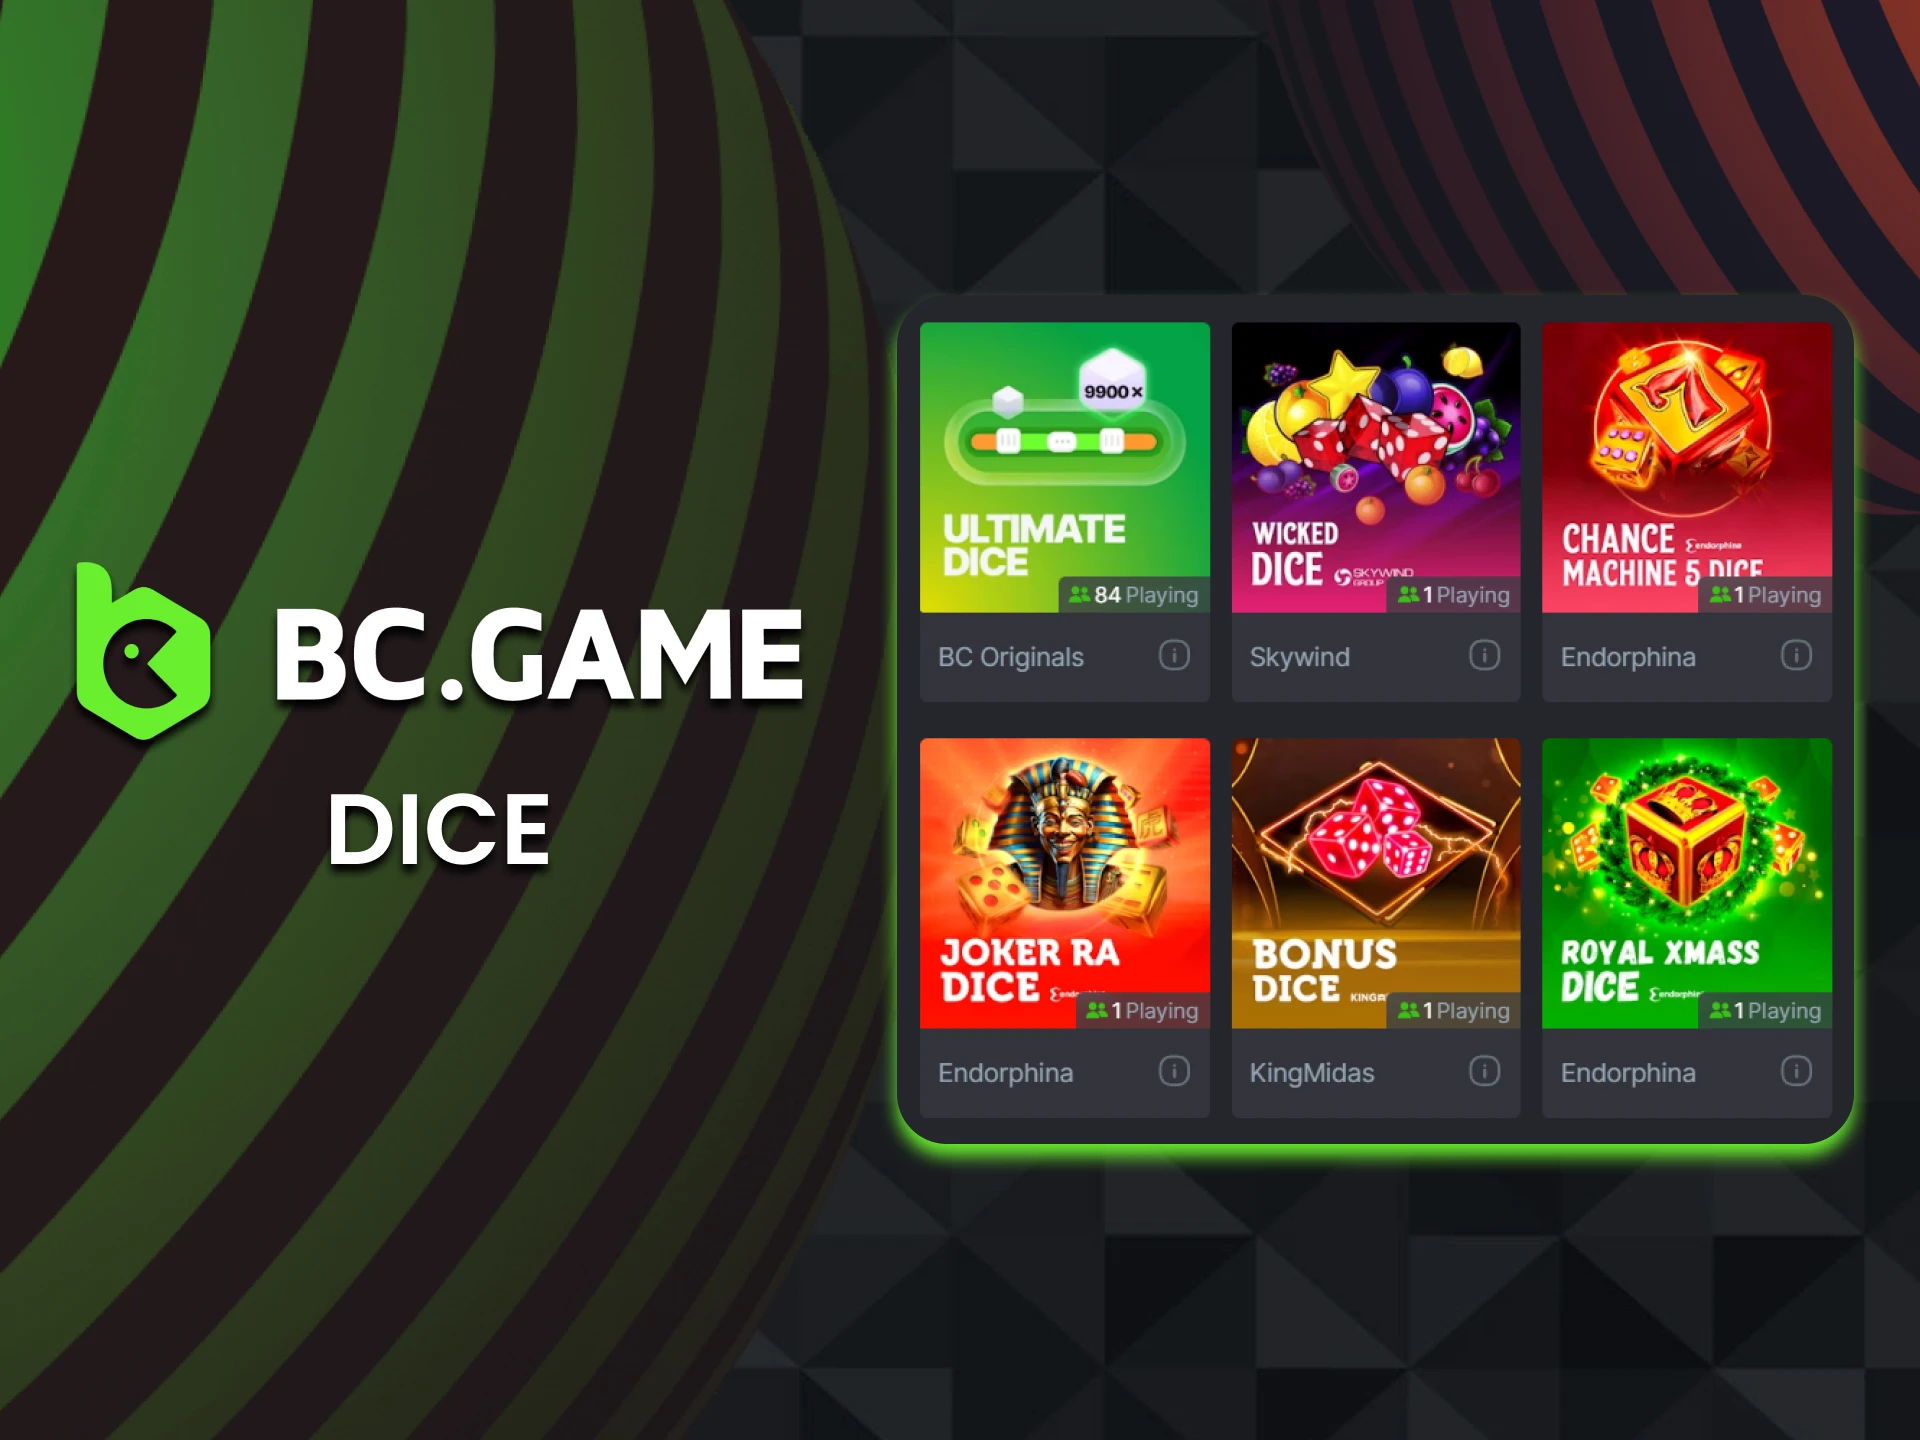 Play Dice games on the BC Game crypto casino.